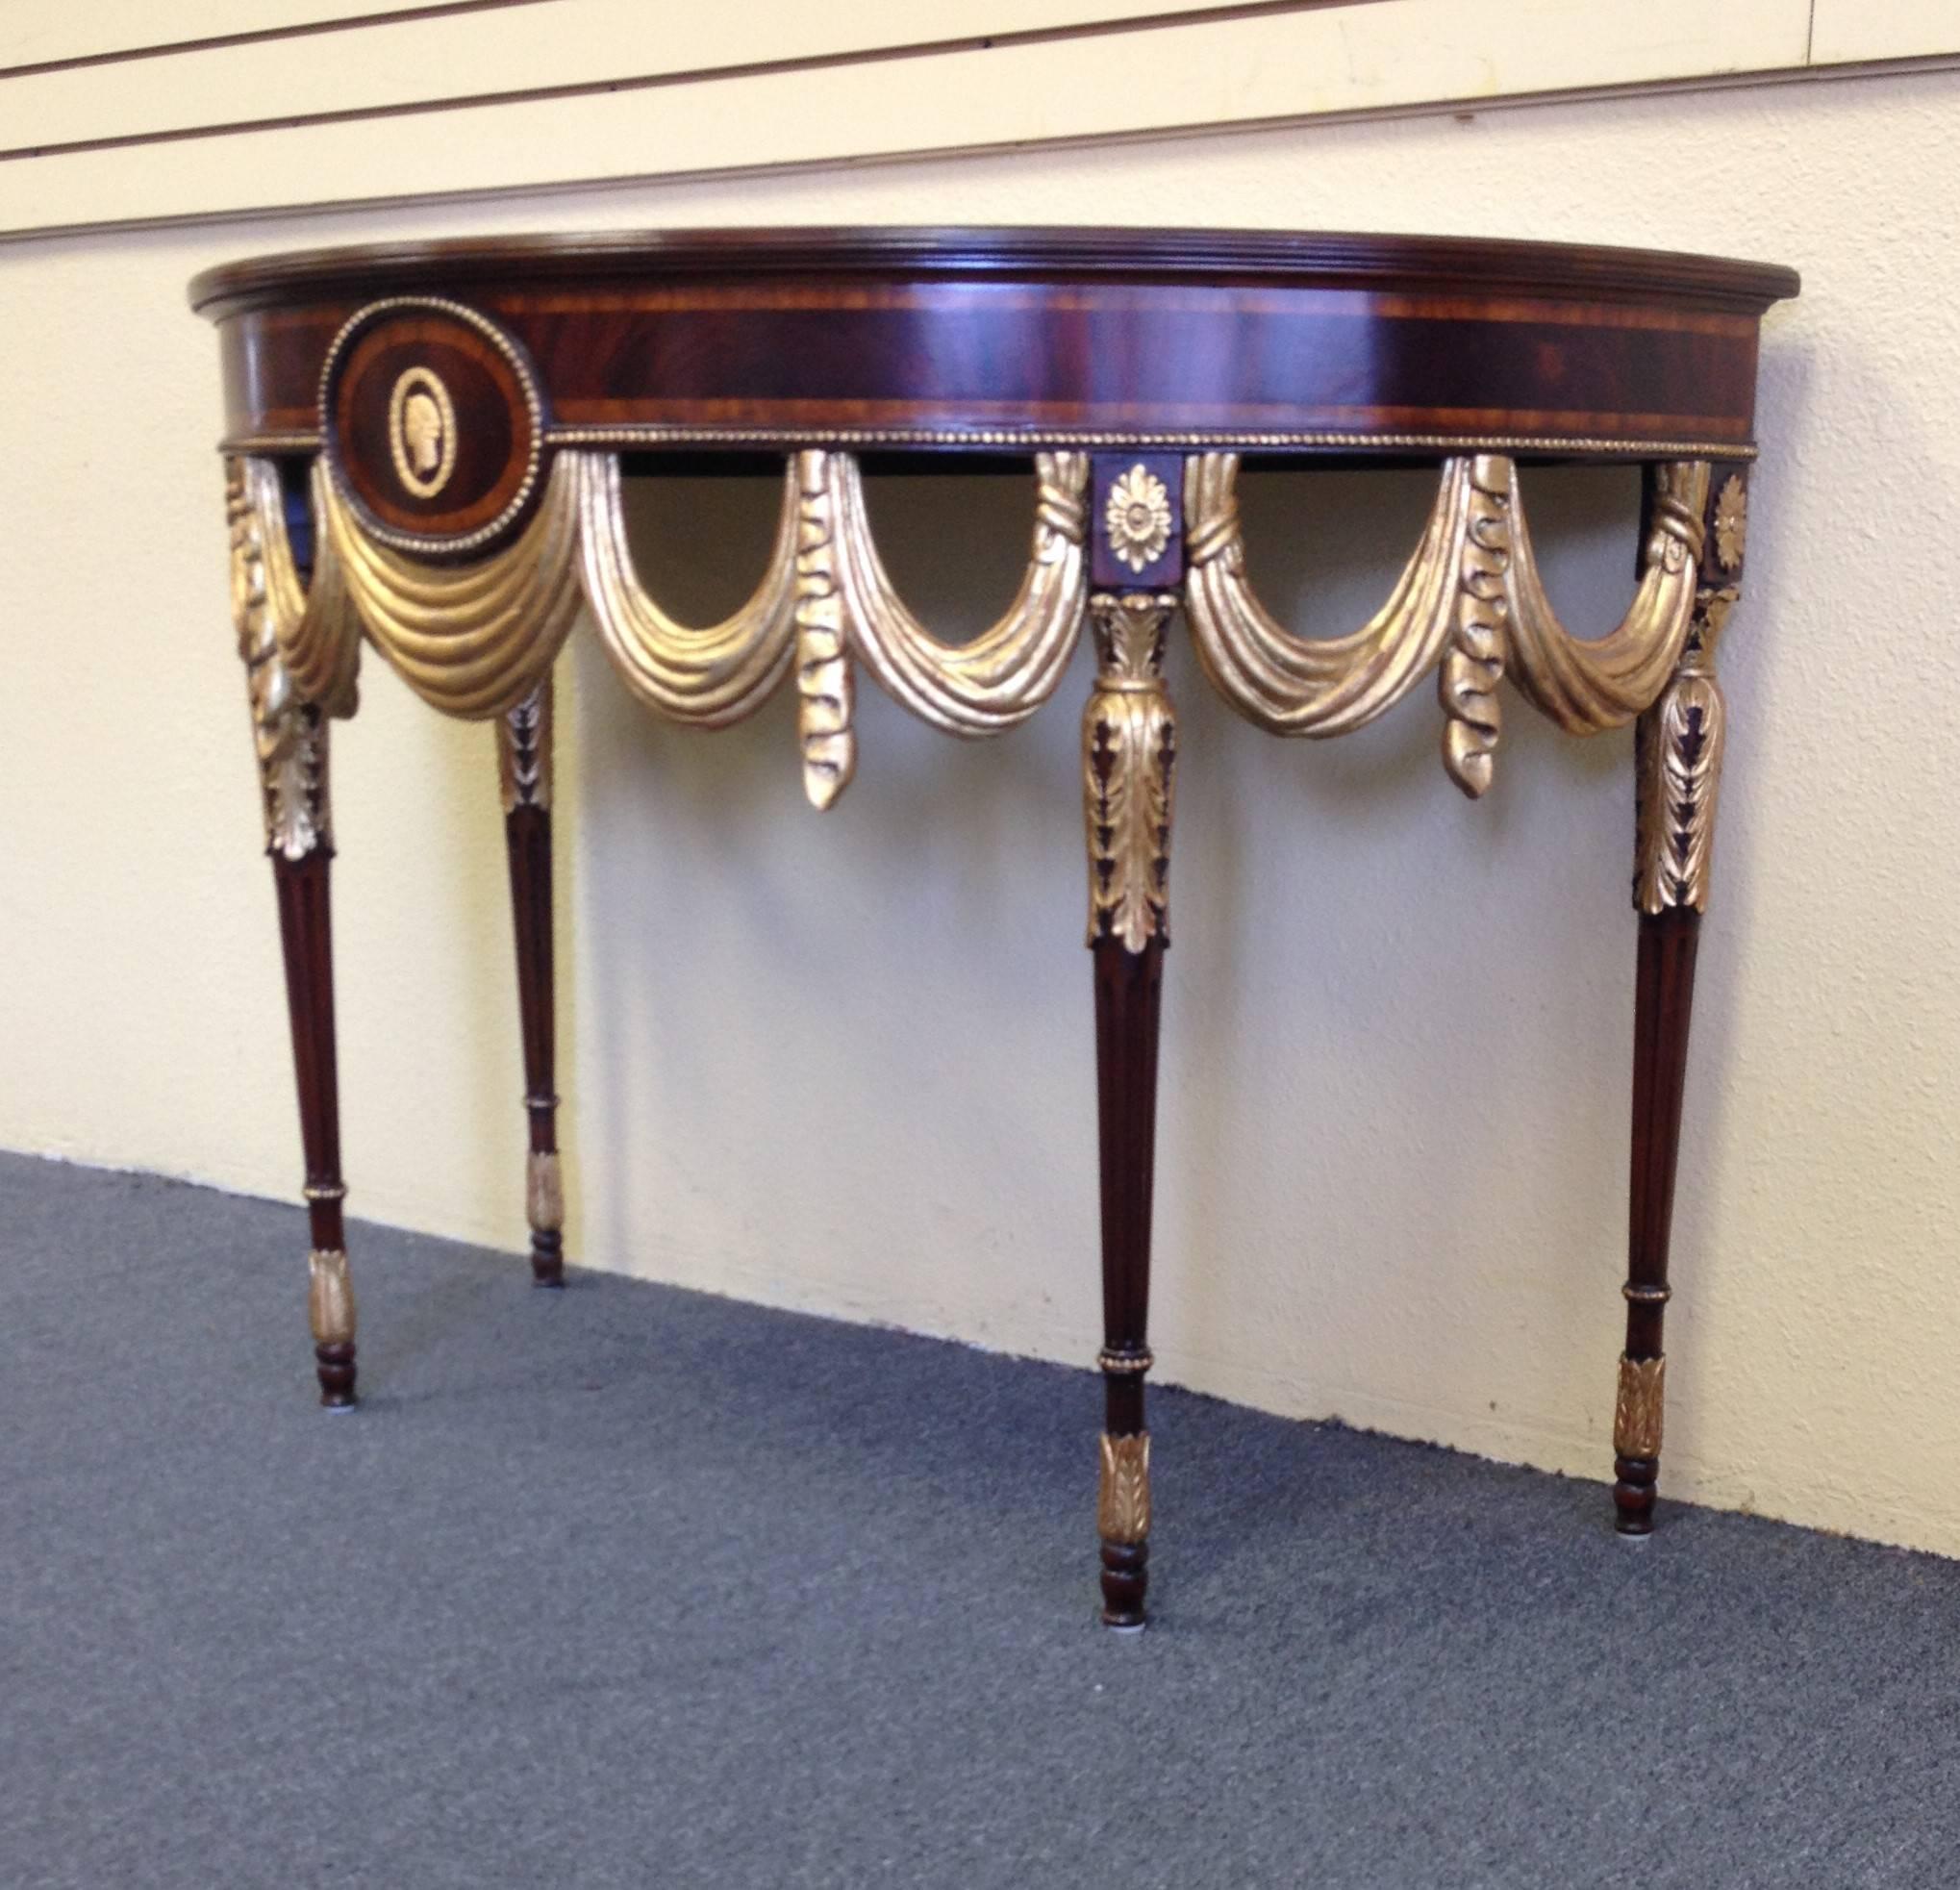 Fabulous demilune inlaid mahogany console table by Maitland-Smith. See our similar listing of a second M.S. demilune table. The two tables can be combined to form a round table.